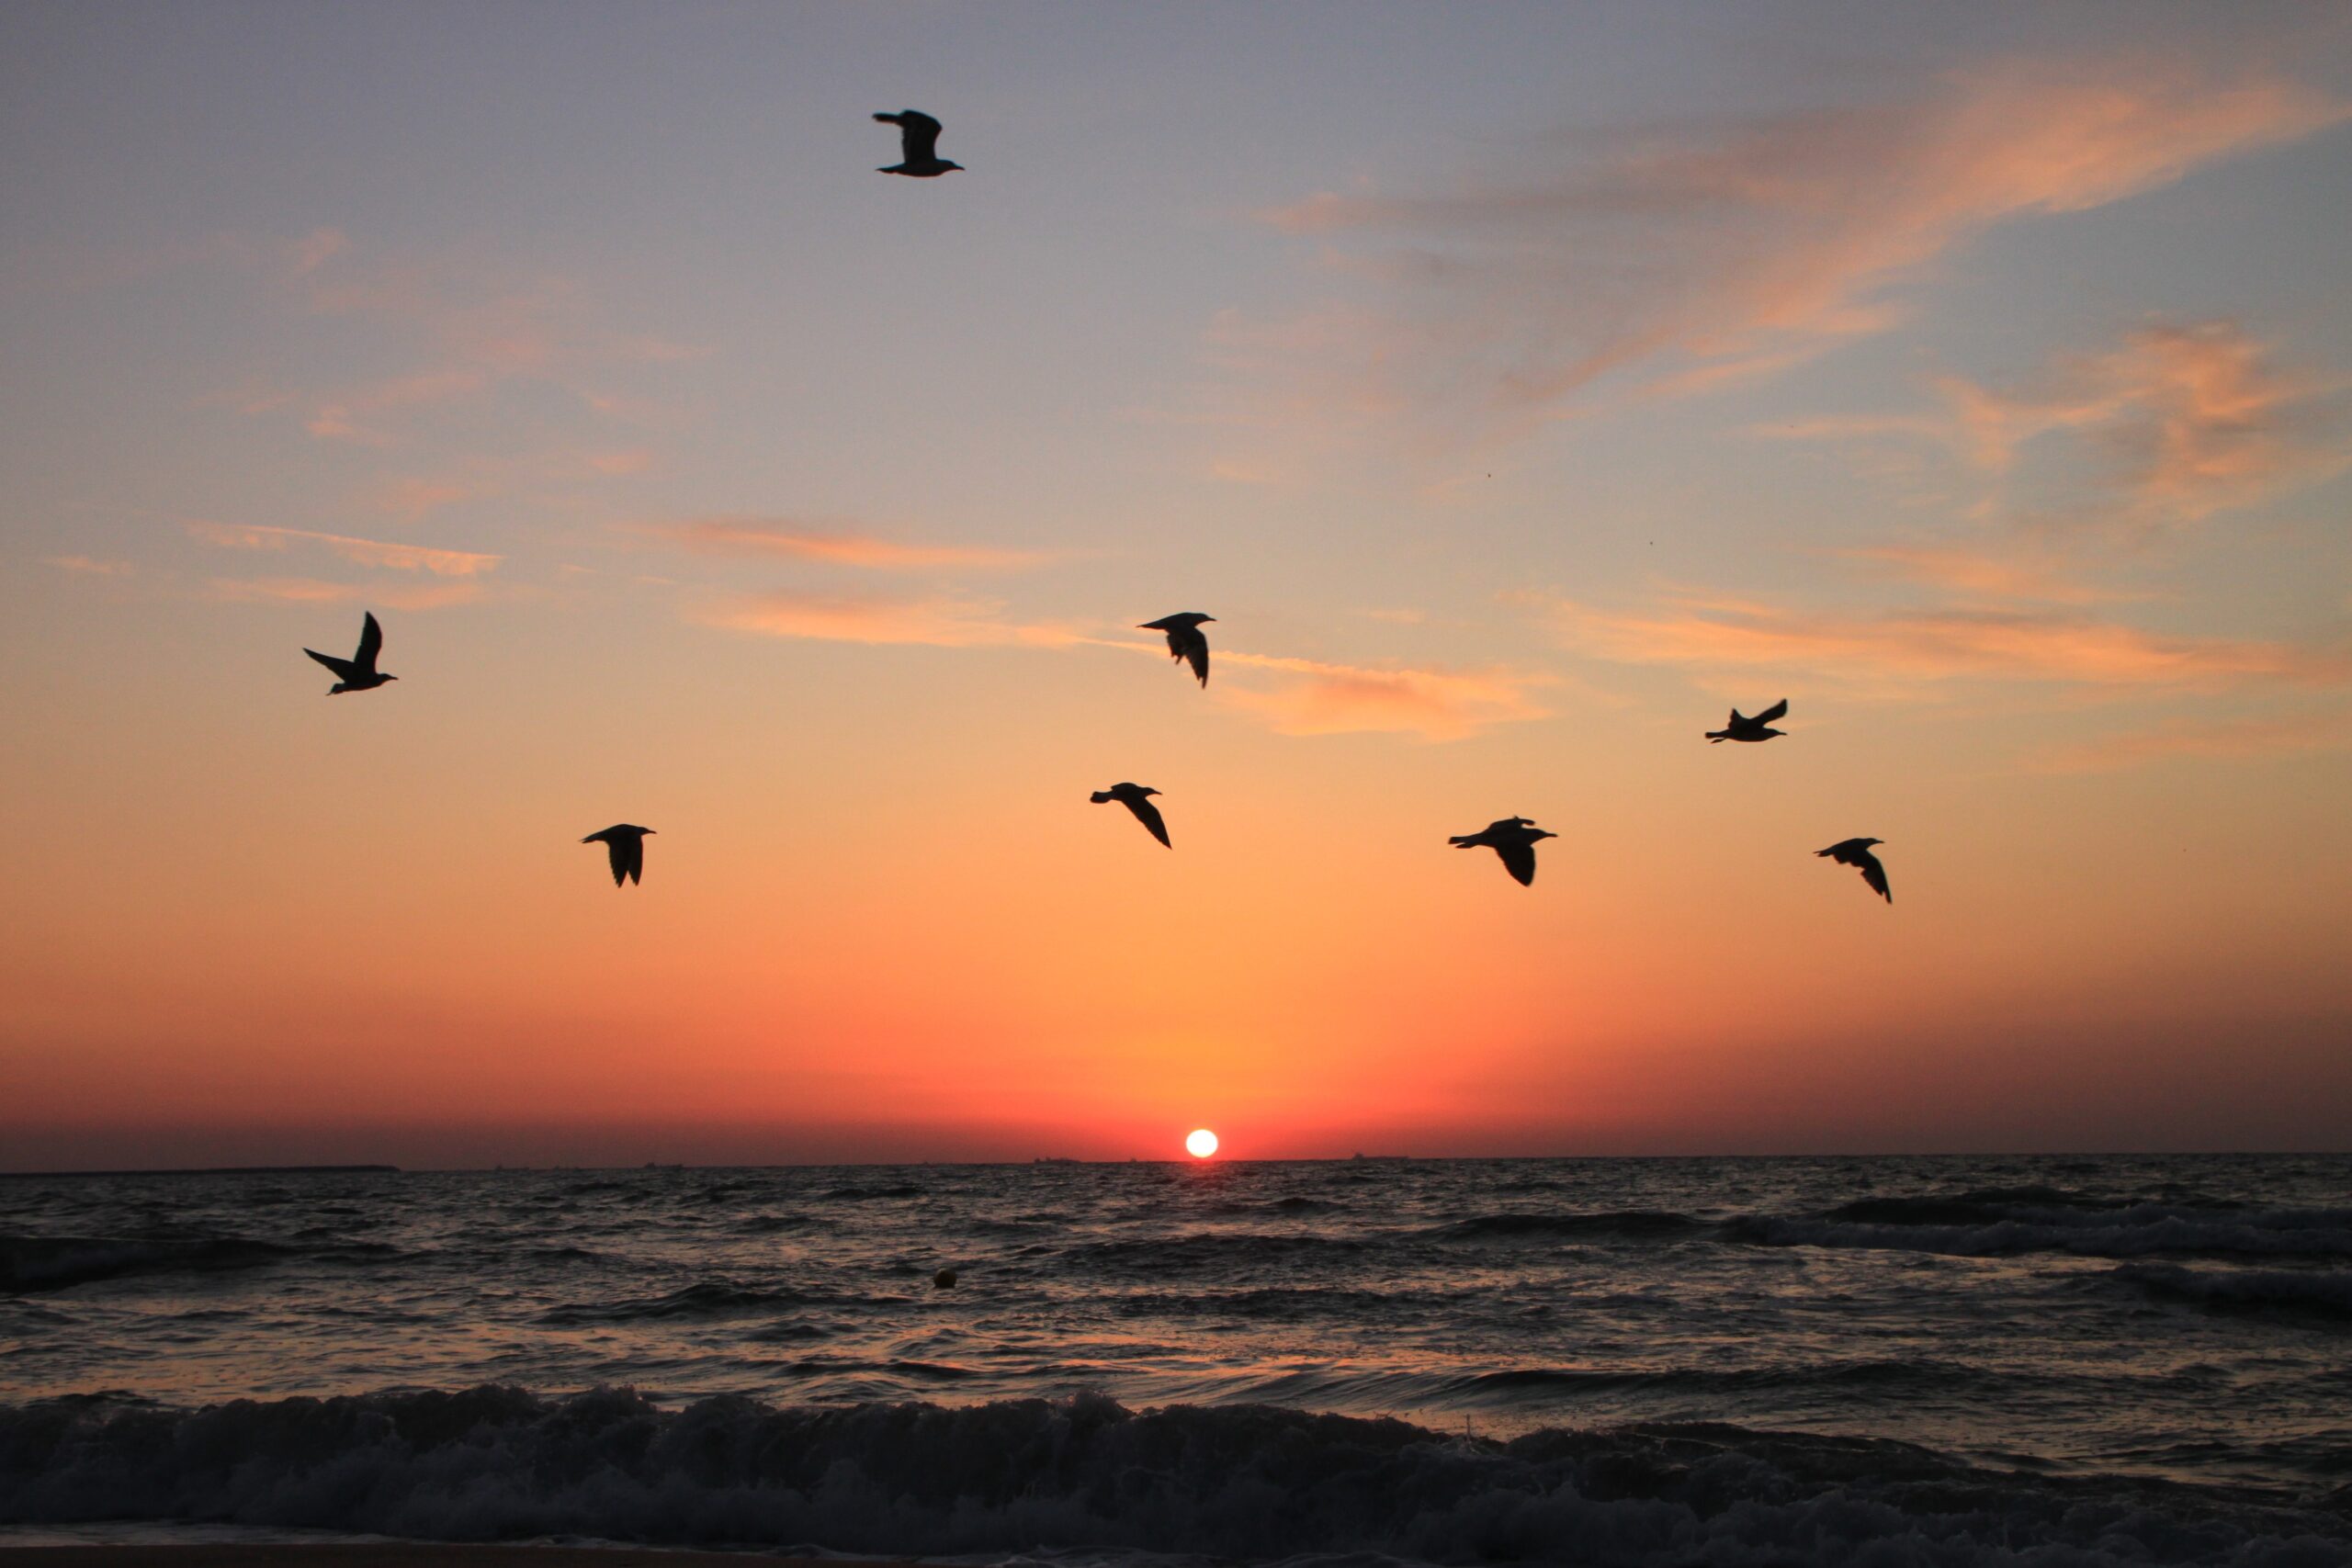 Silhouettes of seabirds flying above an ocean at sunset.